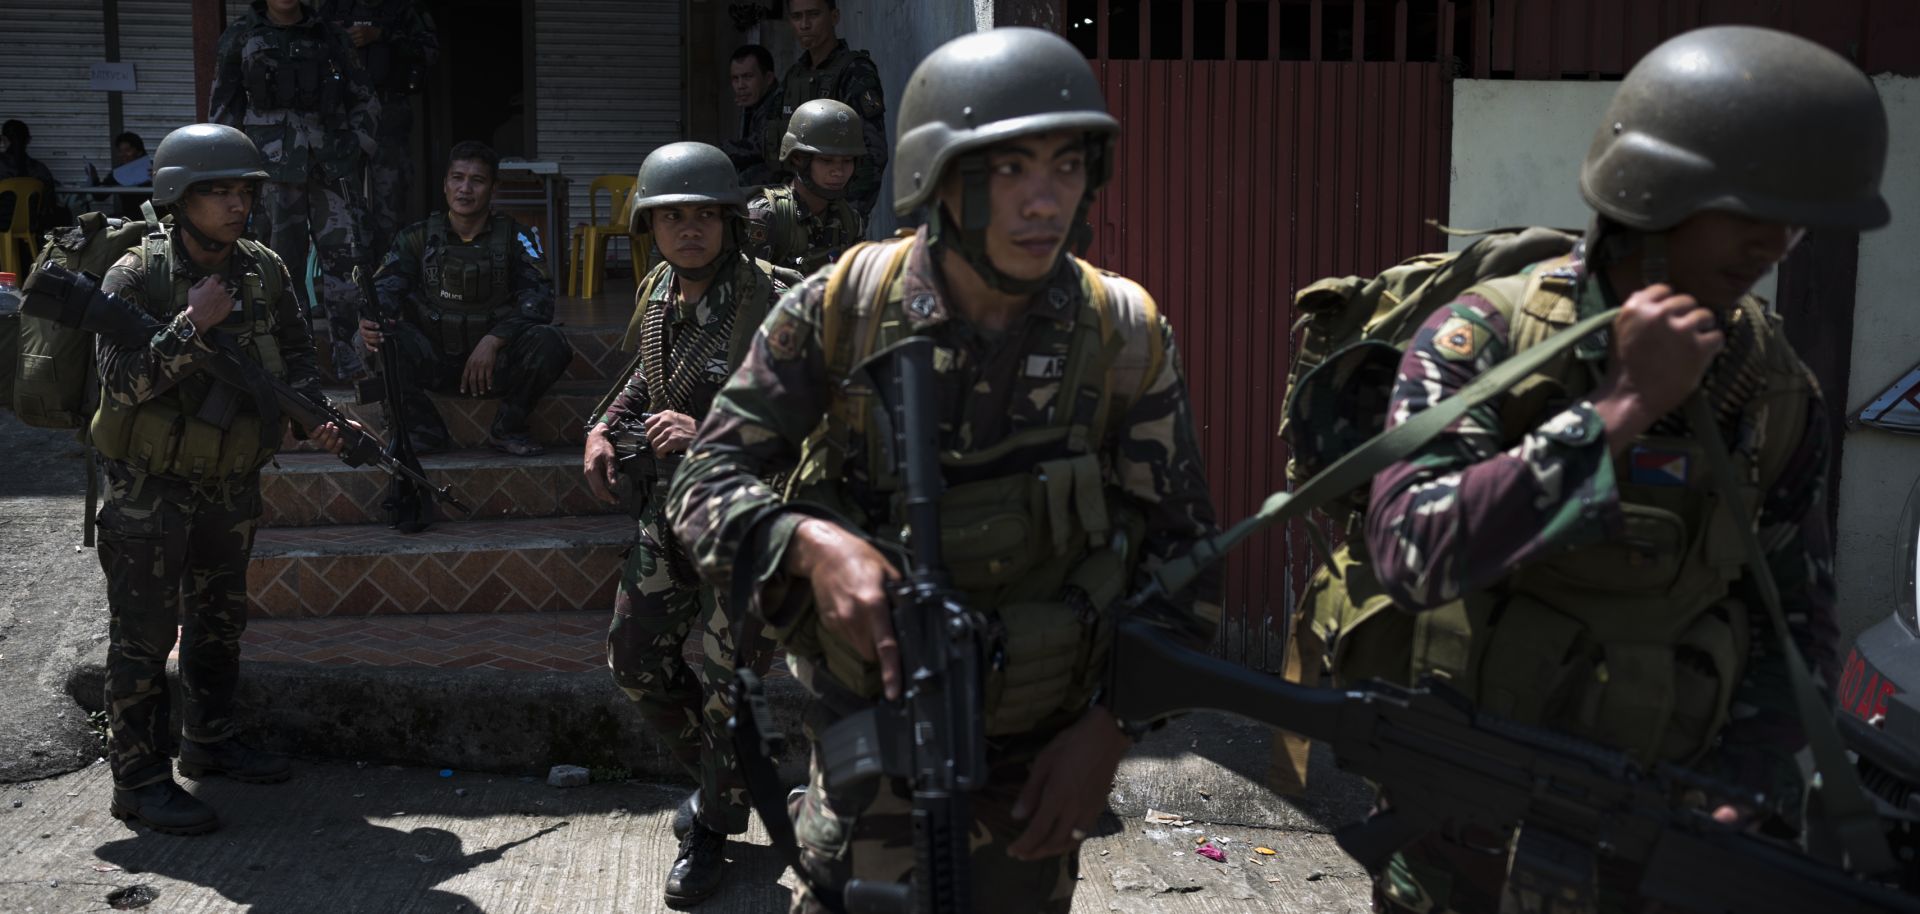 Philippine lawmakers continue to wrangle over passage of the Bangsamoro Basic Law, adding to political uncertainty in Mindanao that could help Islamist militias there redevelop their strength.